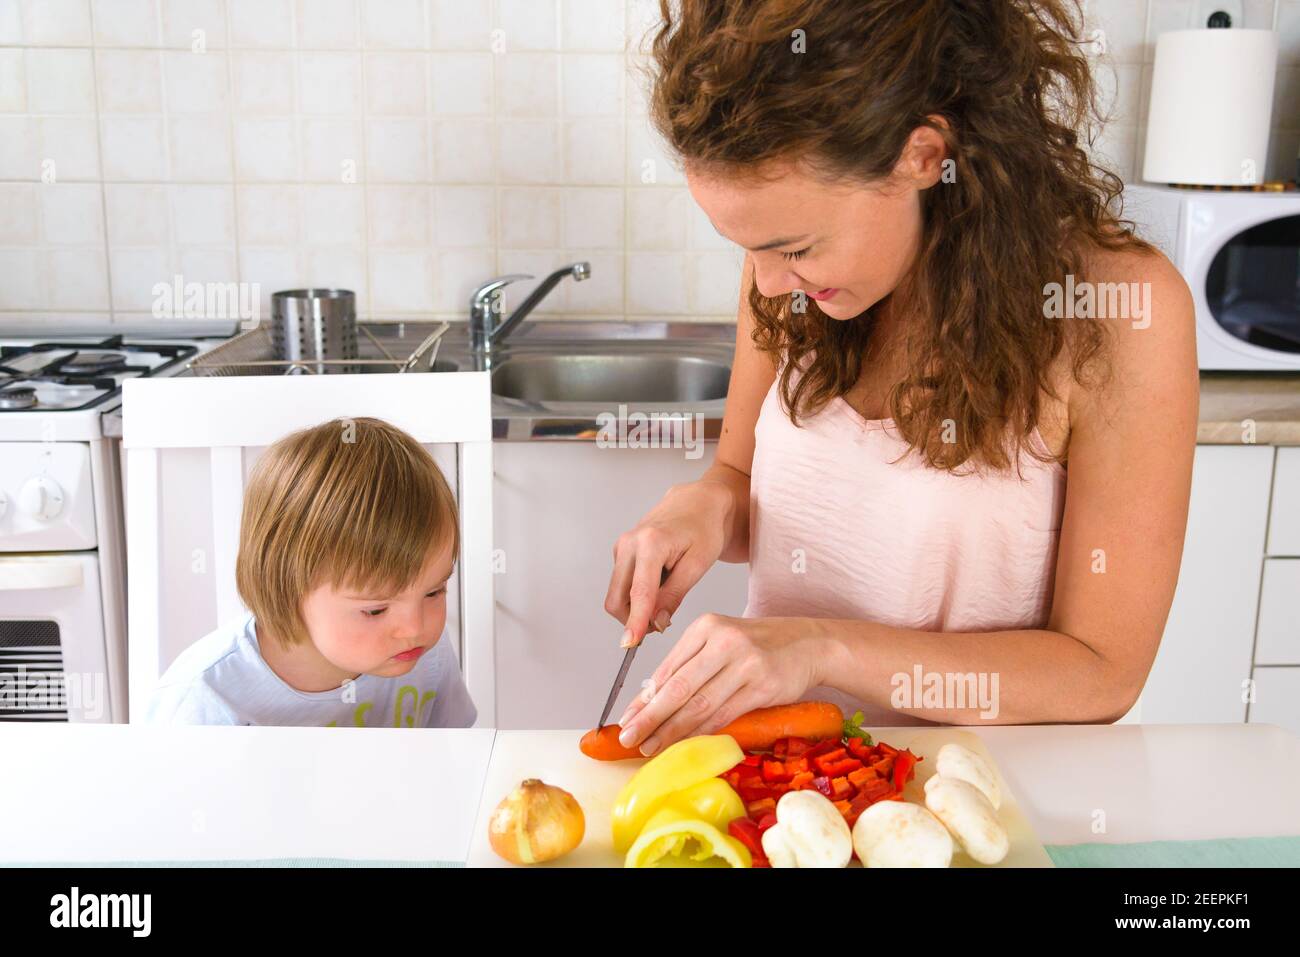 Single mother making dish for her son with Down Syndrome during Stock Photo